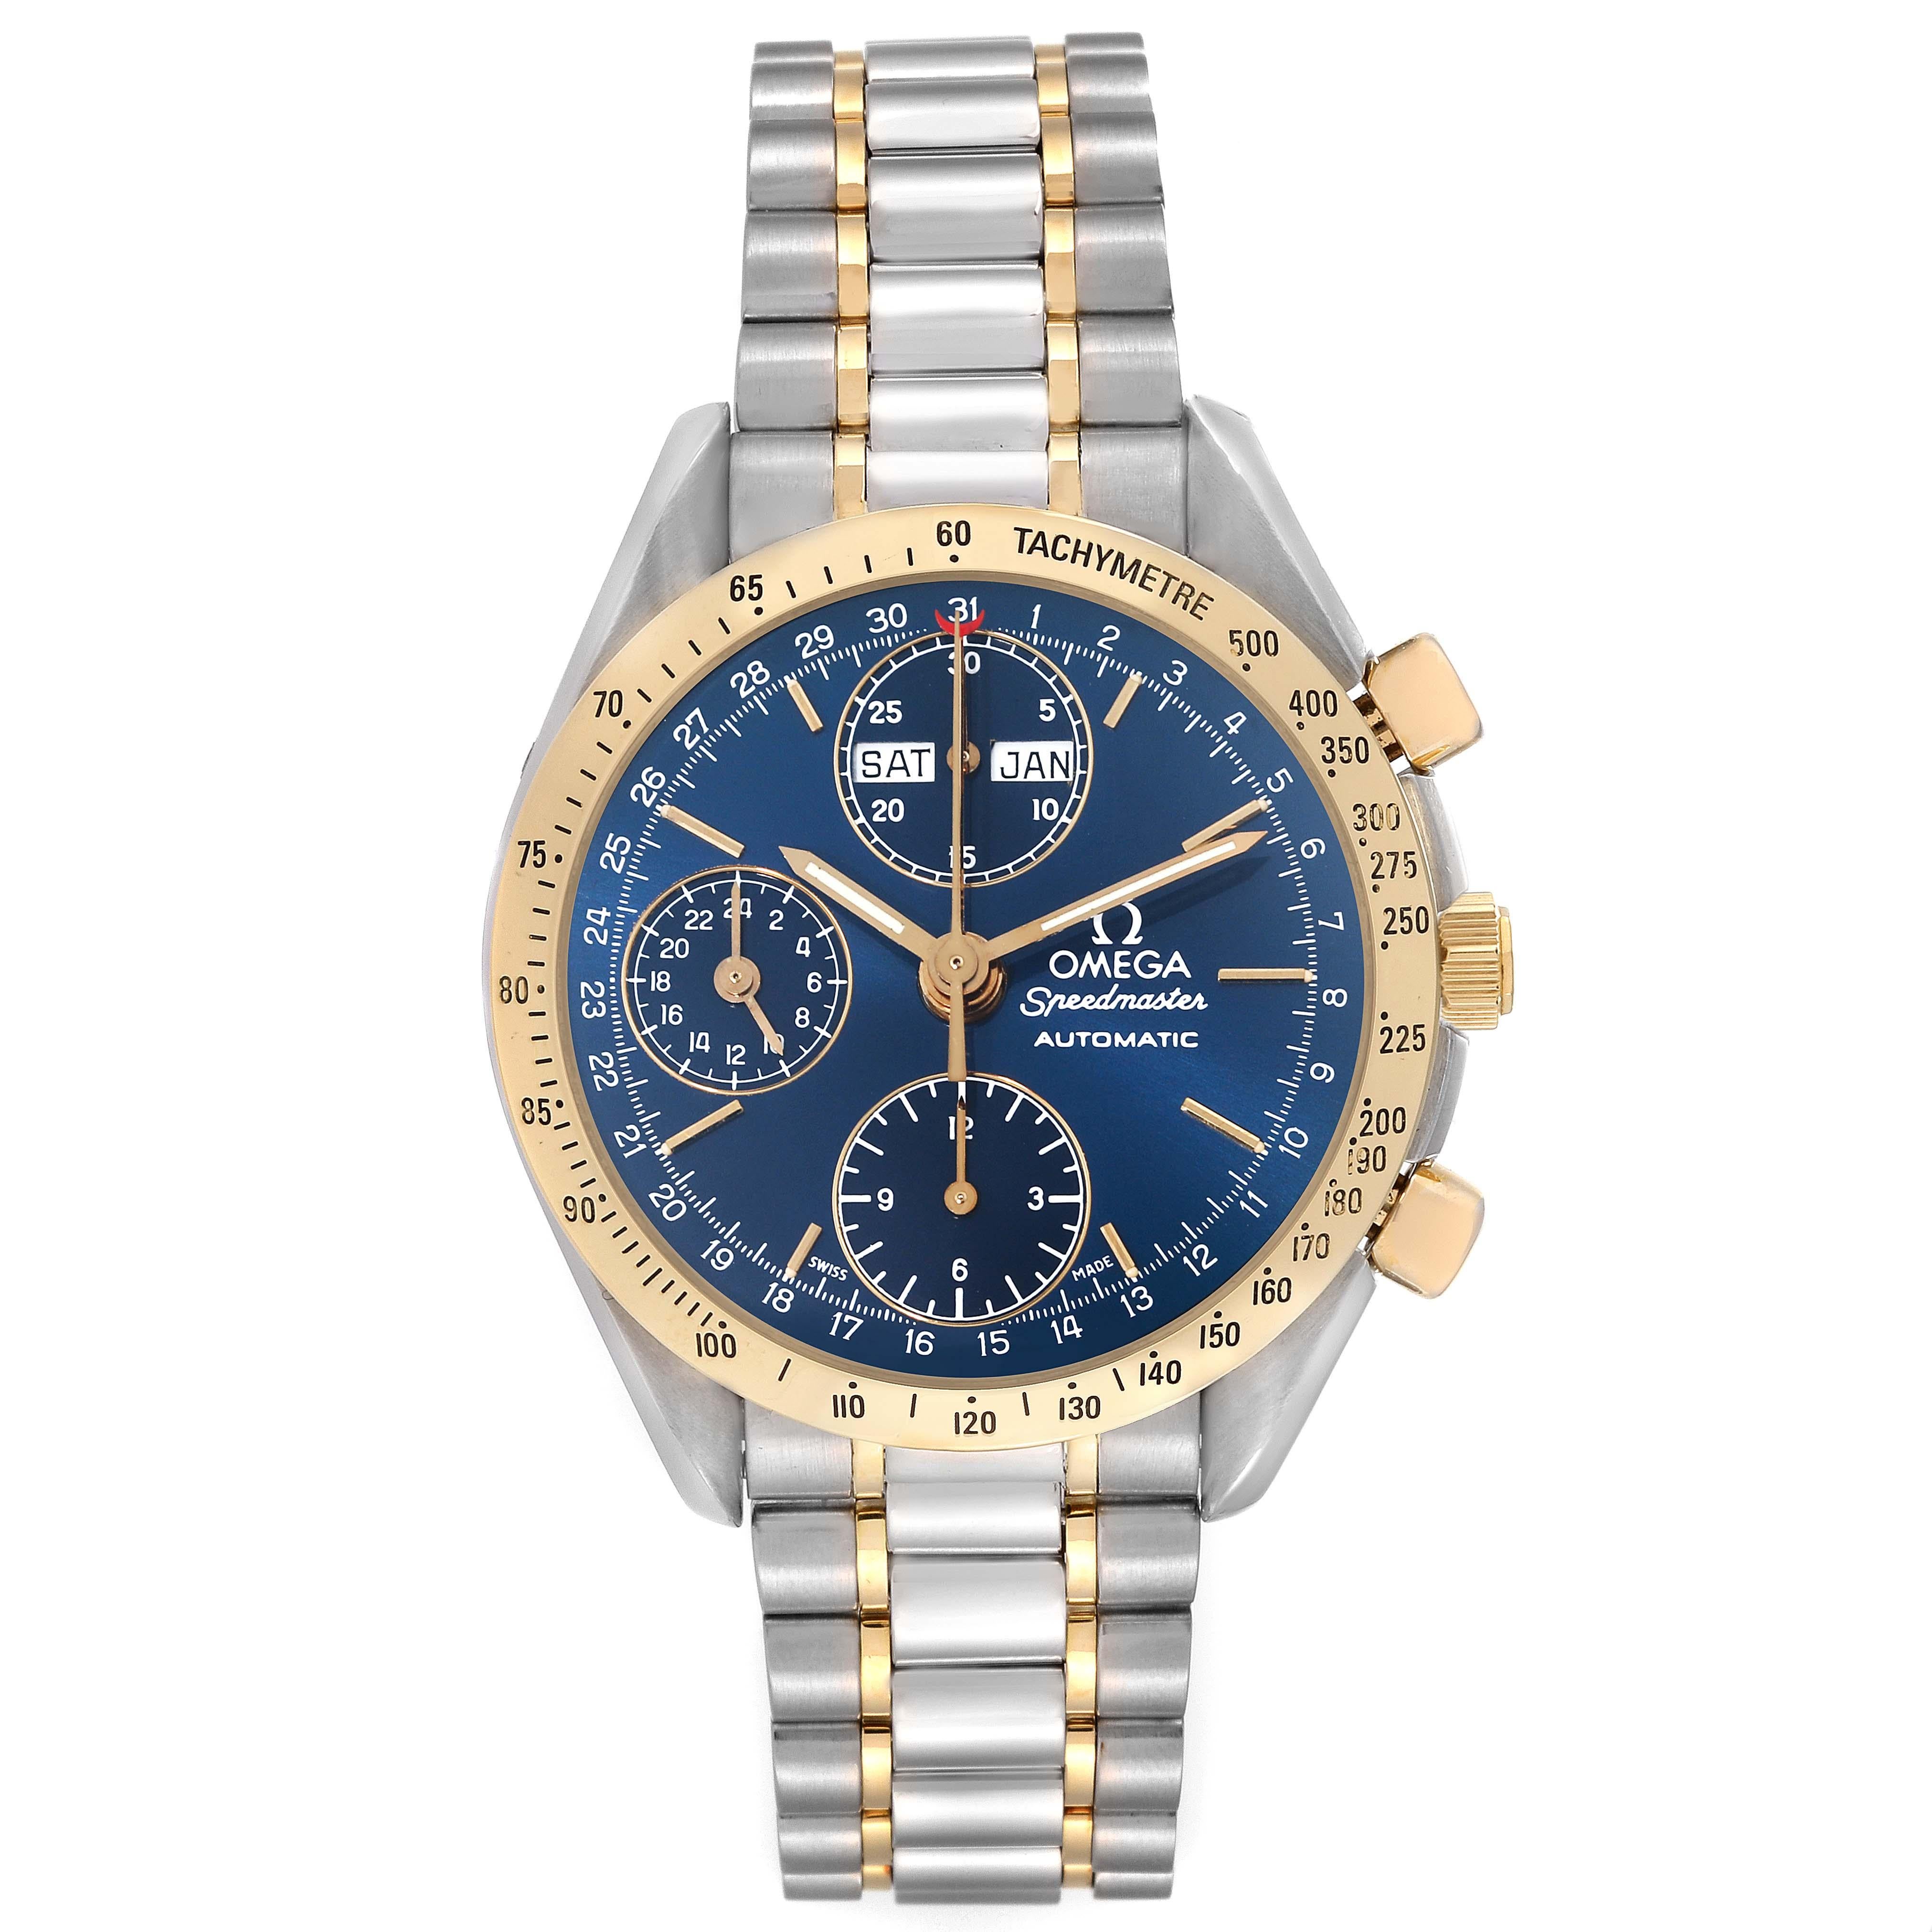 Omega Speedmaster Day Date Steel Yellow Gold Mens Watch 3321.80.00. Automatic self-winding chronograph movement. Stainless steel and 18K yellow gold round case 39.0 mm in diameter. 18K yellow gold bezel with tachymetric scale. Scratch-resistant